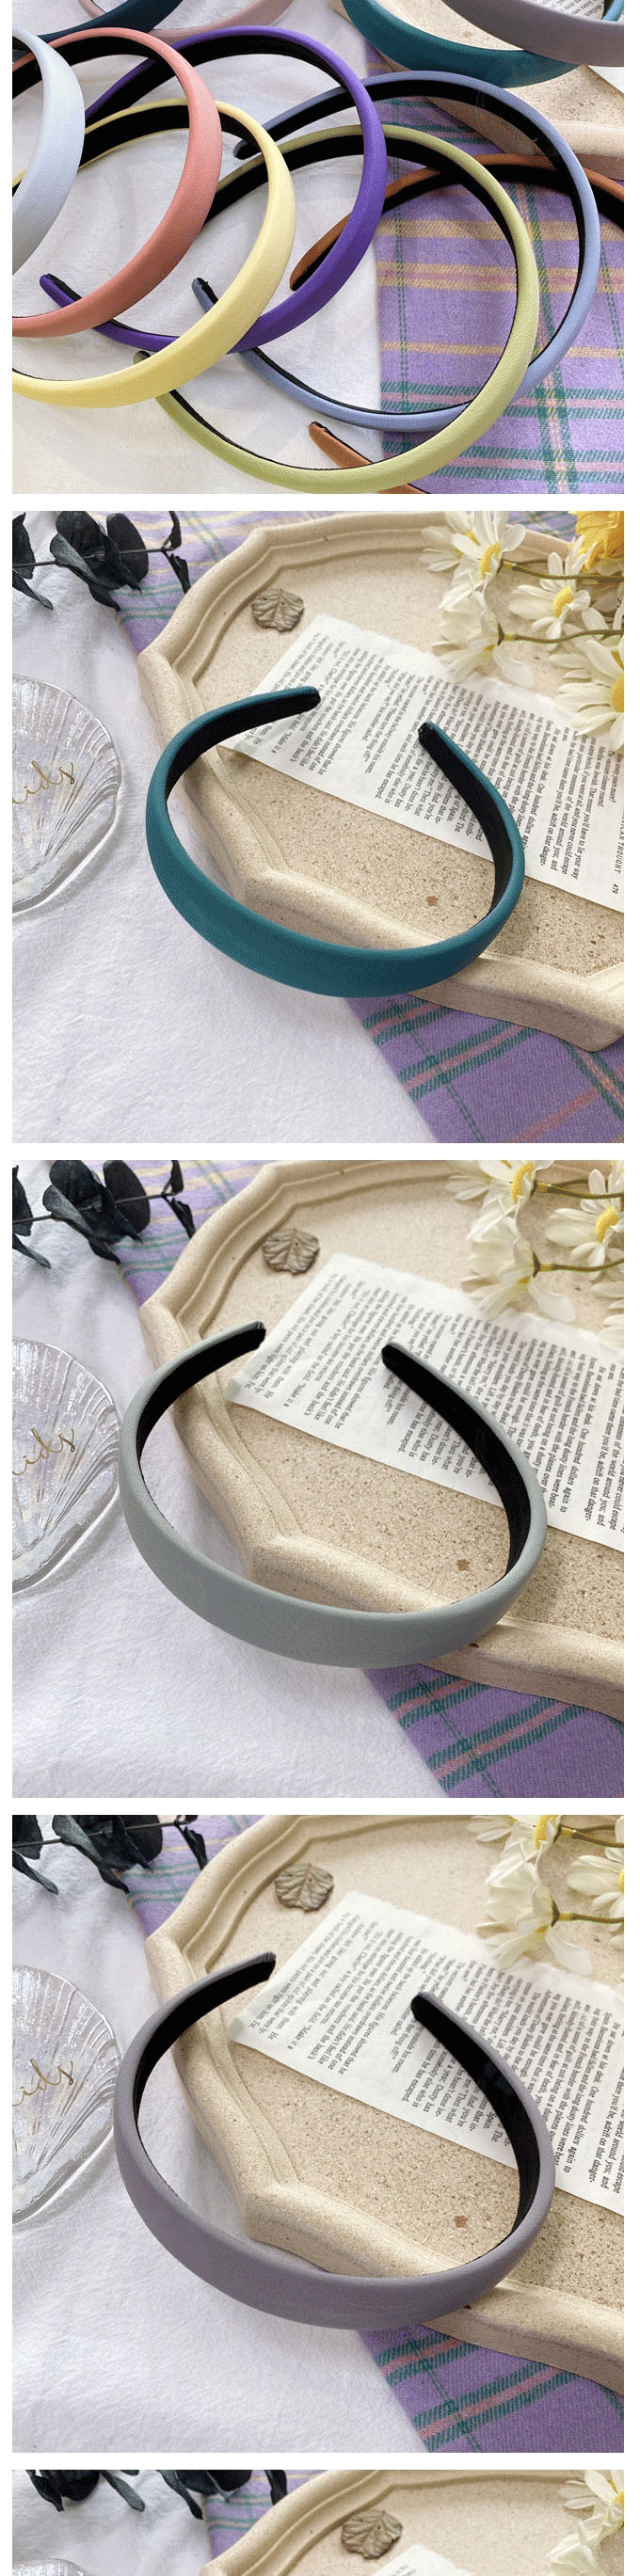 Fashion Off-white Sponge Solid Color Wide-brimmed Fabric Headband,Head Band